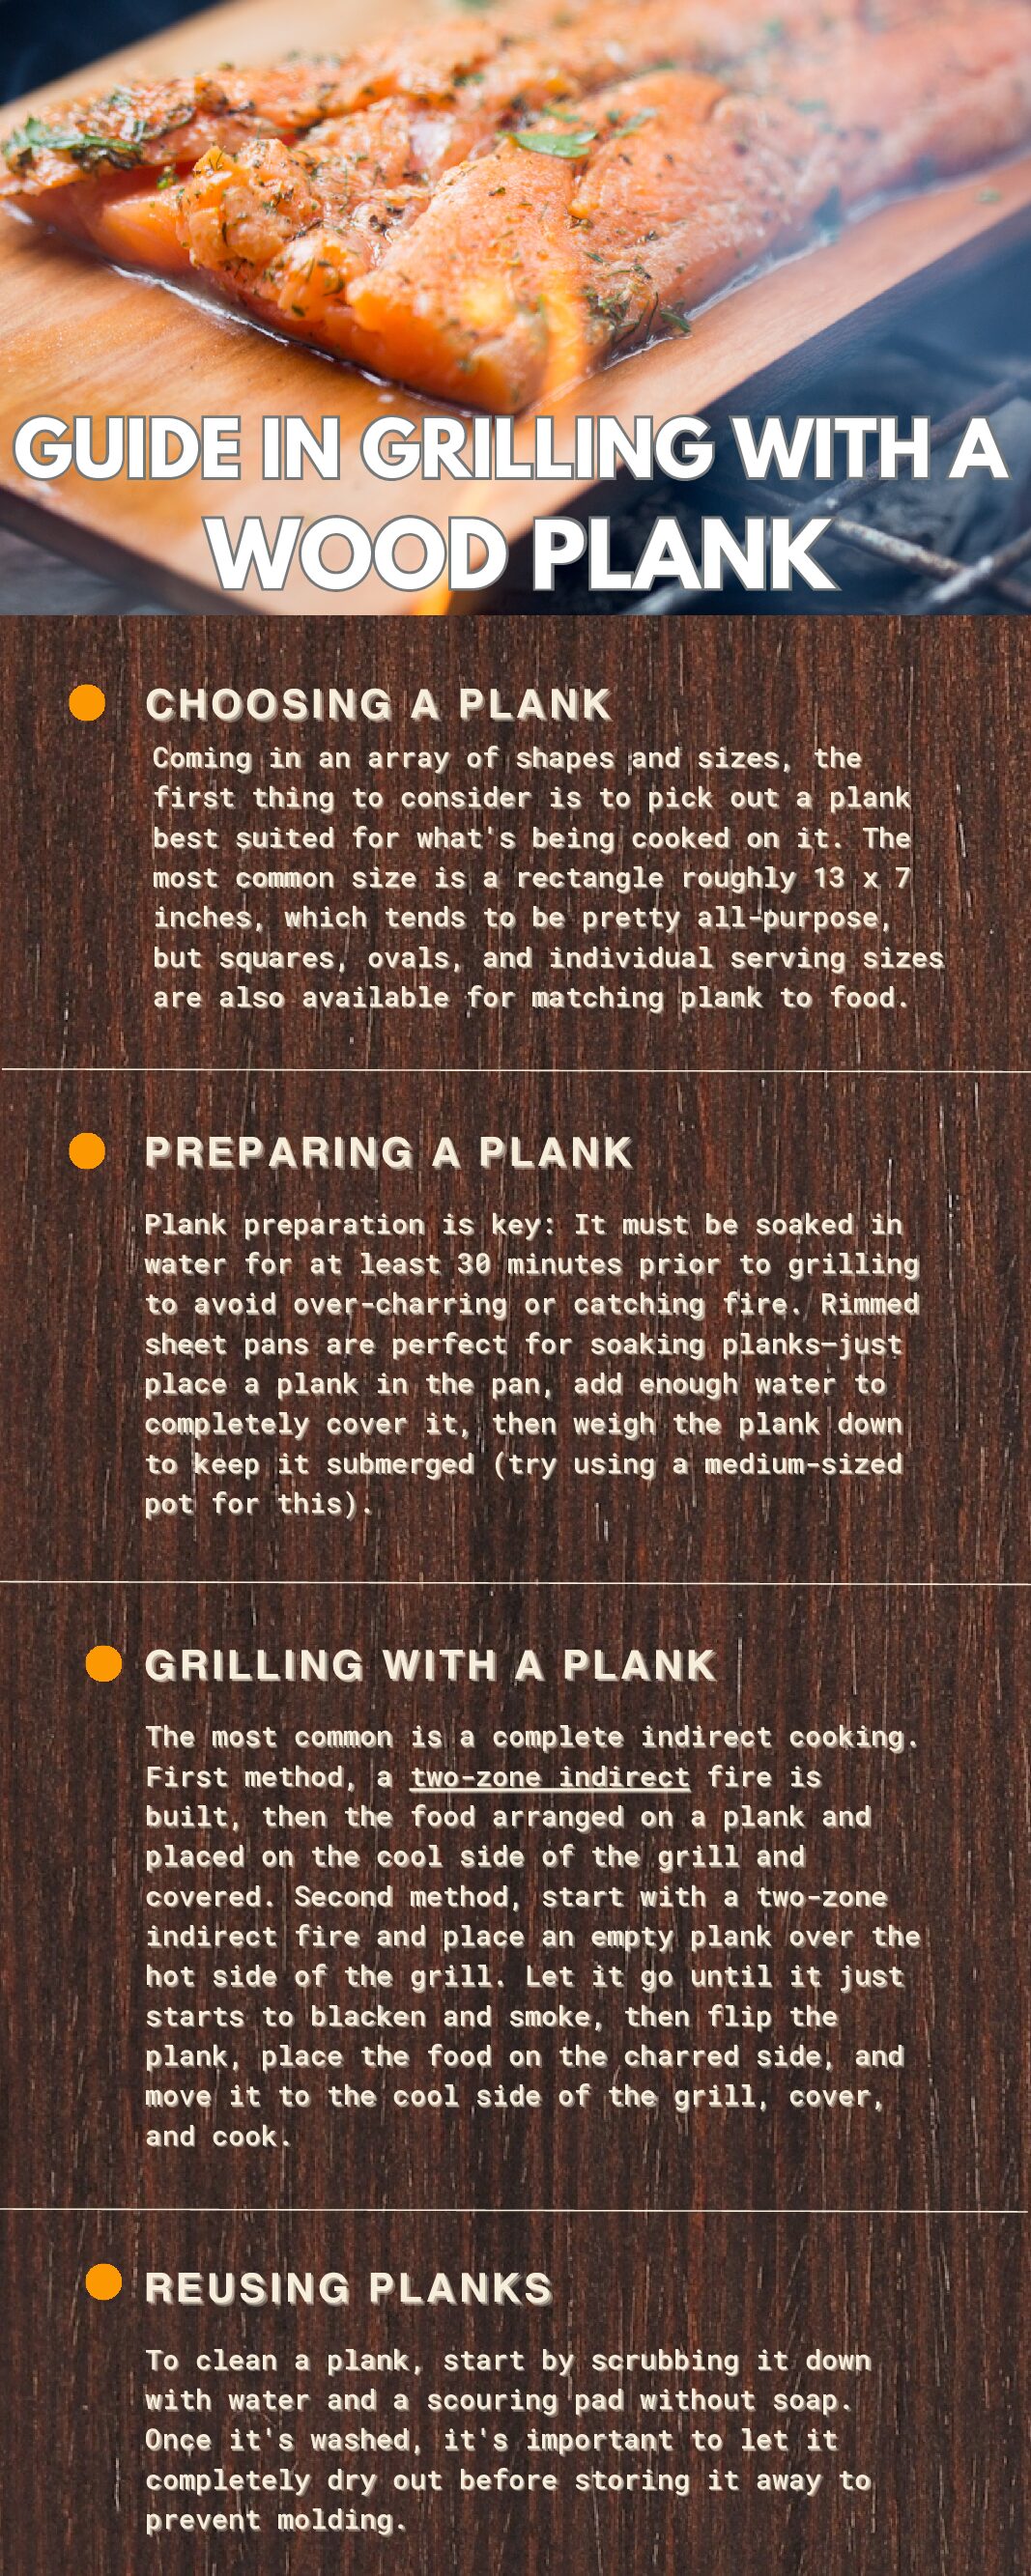 Plank Grilling